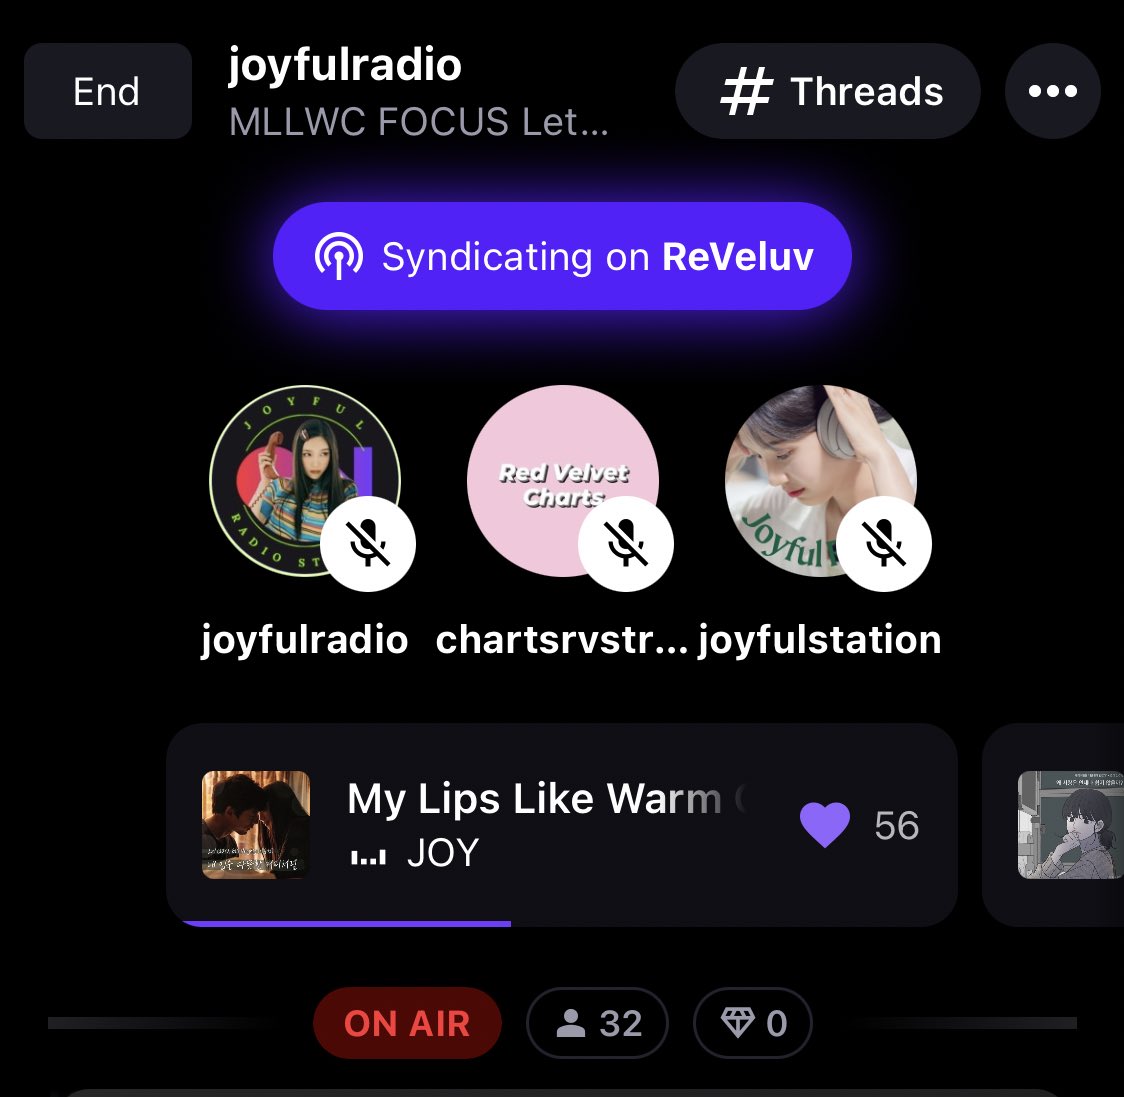 Good morning ☀️ We’re still on air for the last hour, but it’s never too late to join us 💚 Come enJOY your morning coffee with us ☕️ 🔗 stationhead.com/joyfulradio #JOY #조이 @RVsmtown